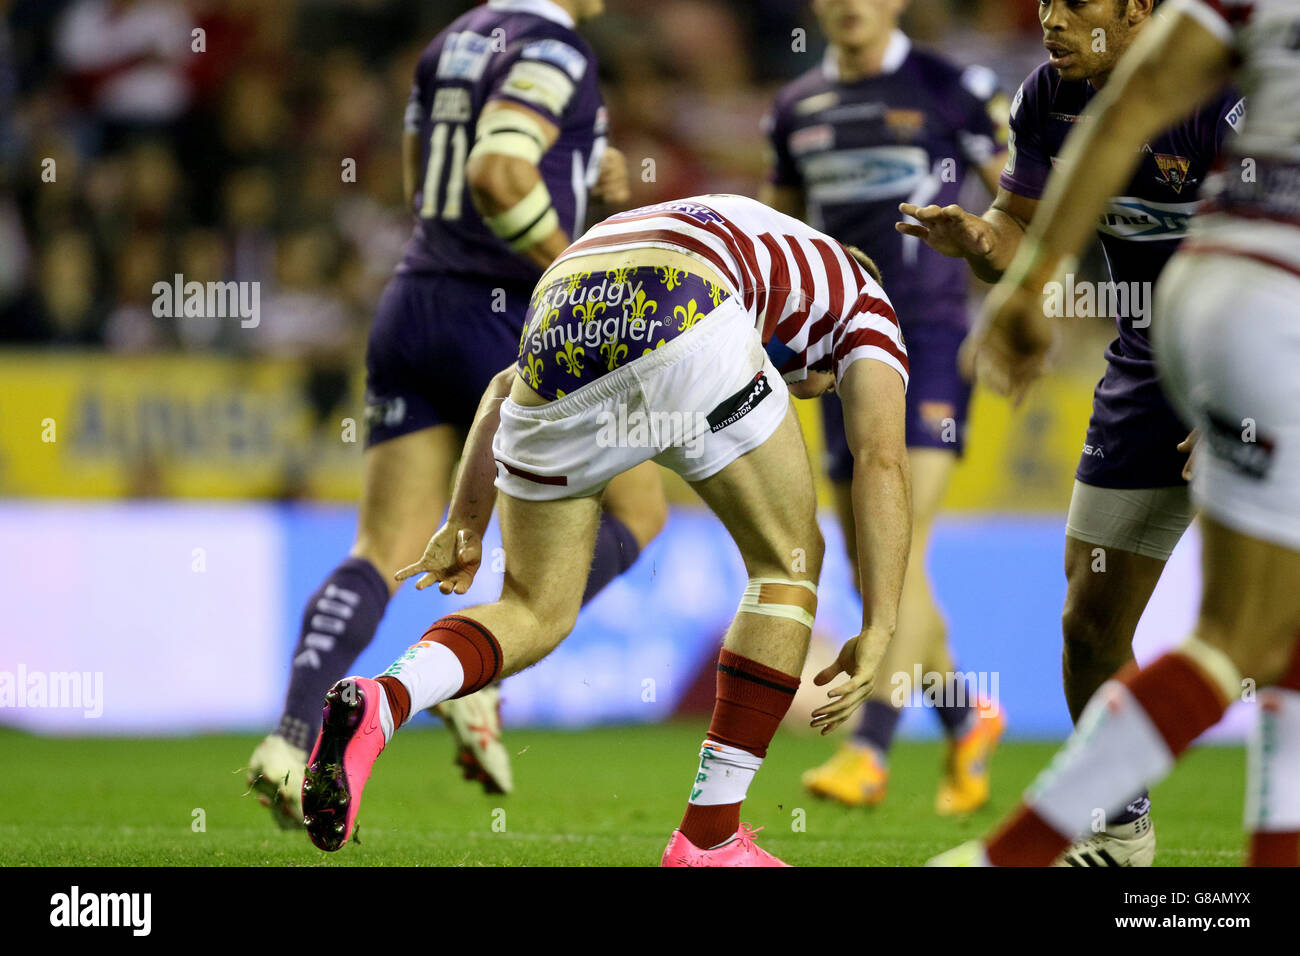 Wigan Warriors' Joe Burgess' shorts fall down during the First Utility Super League, Semi Final match at the DW Stadium, Wigan. PRESS ASSOCIATION Photo. Picture date: Thursday October 1, 2015. See PA story RUGBYL Wigan. Photo credit should read: Richard Sellers/PA Wire. RESTRICTIONS: . No commercial use. No false commercial association. No video emulation. No manipulation of images. Stock Photo